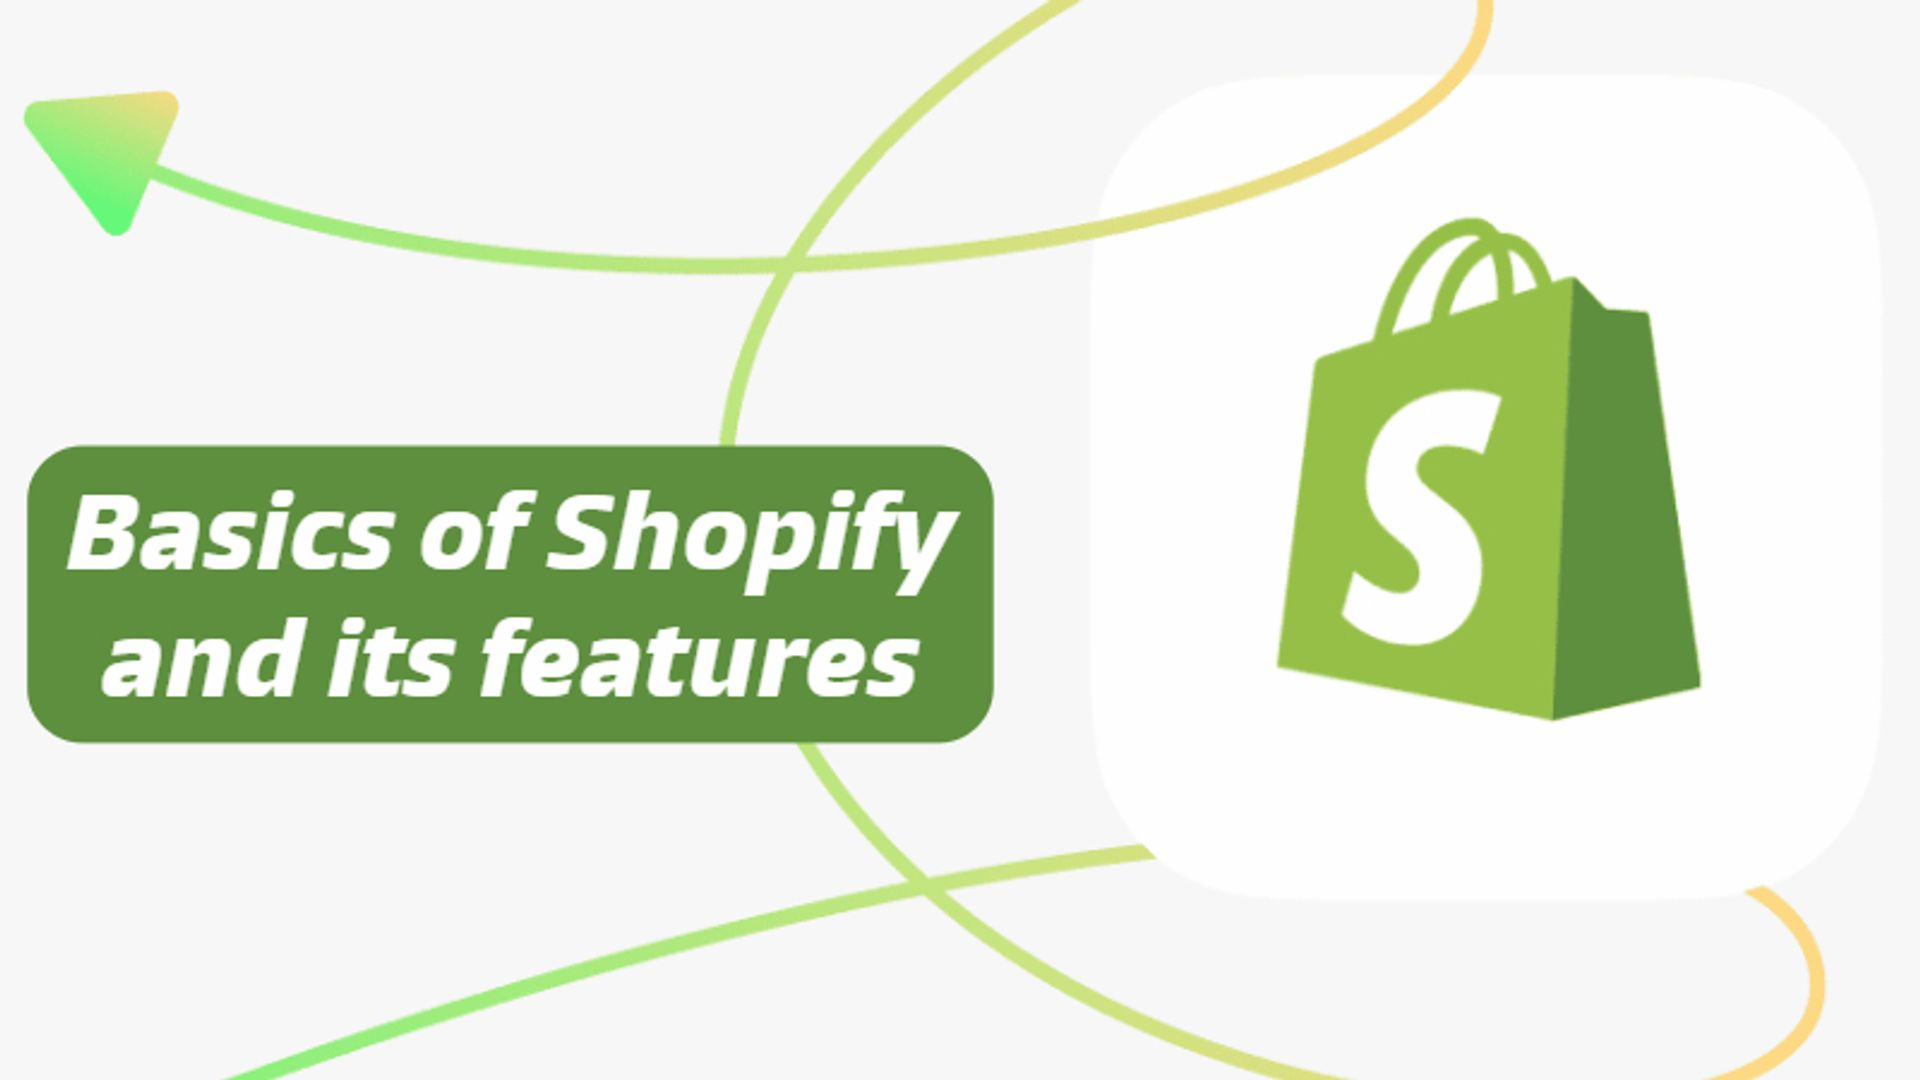 Basics of shopify and it's features